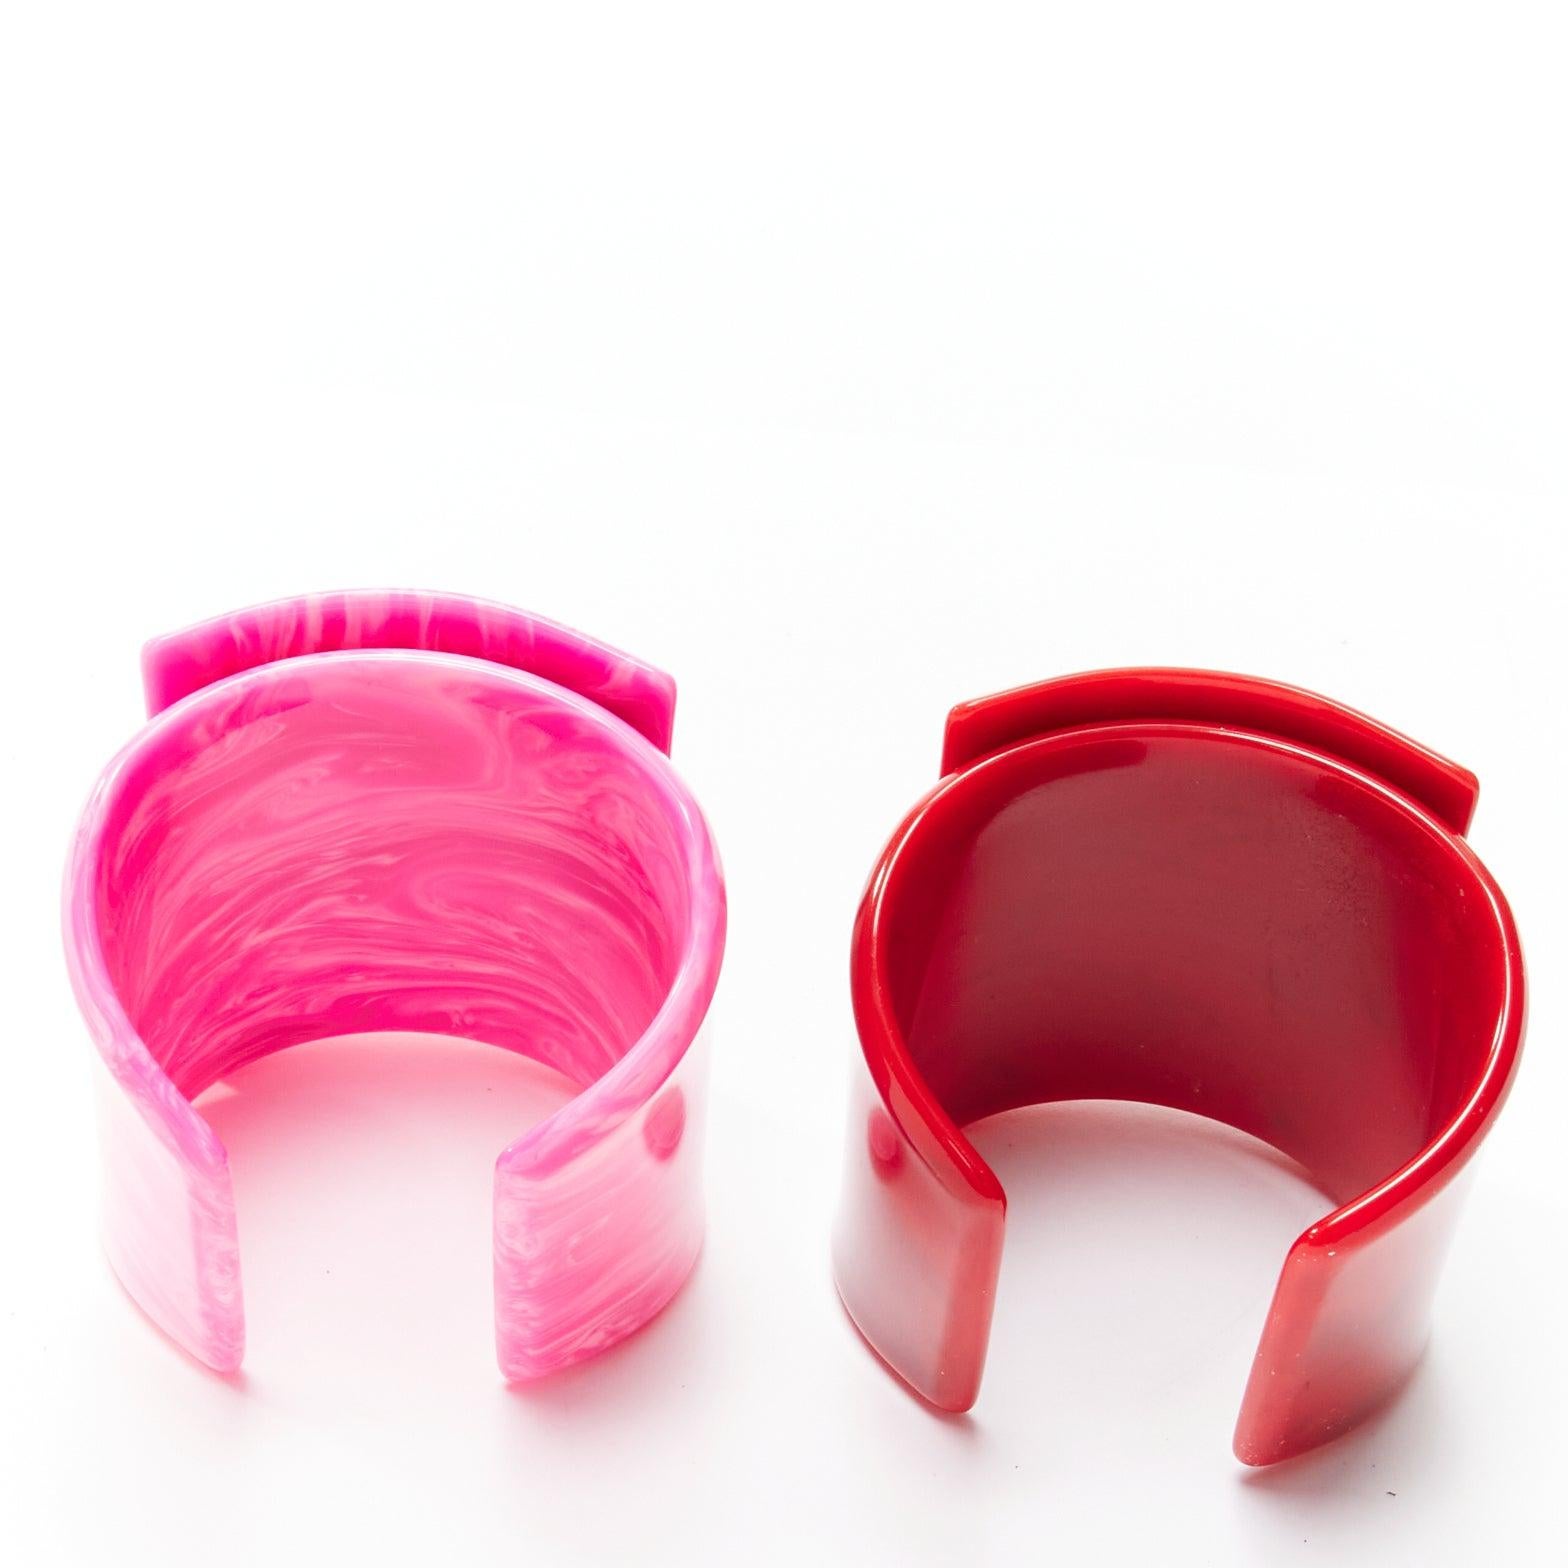 TOGA ARCHIVES pink red acrylic marble swirl oversized cuffs set
Reference: BSHW/A00085
Brand: Toga Archives
Material: Acrylic
Color: Red, Pink
Pattern: Marble
Closure: Slip On
Lining: Red Acrylic
Made in: Japan

CONDITION:
Condition: Very good, this